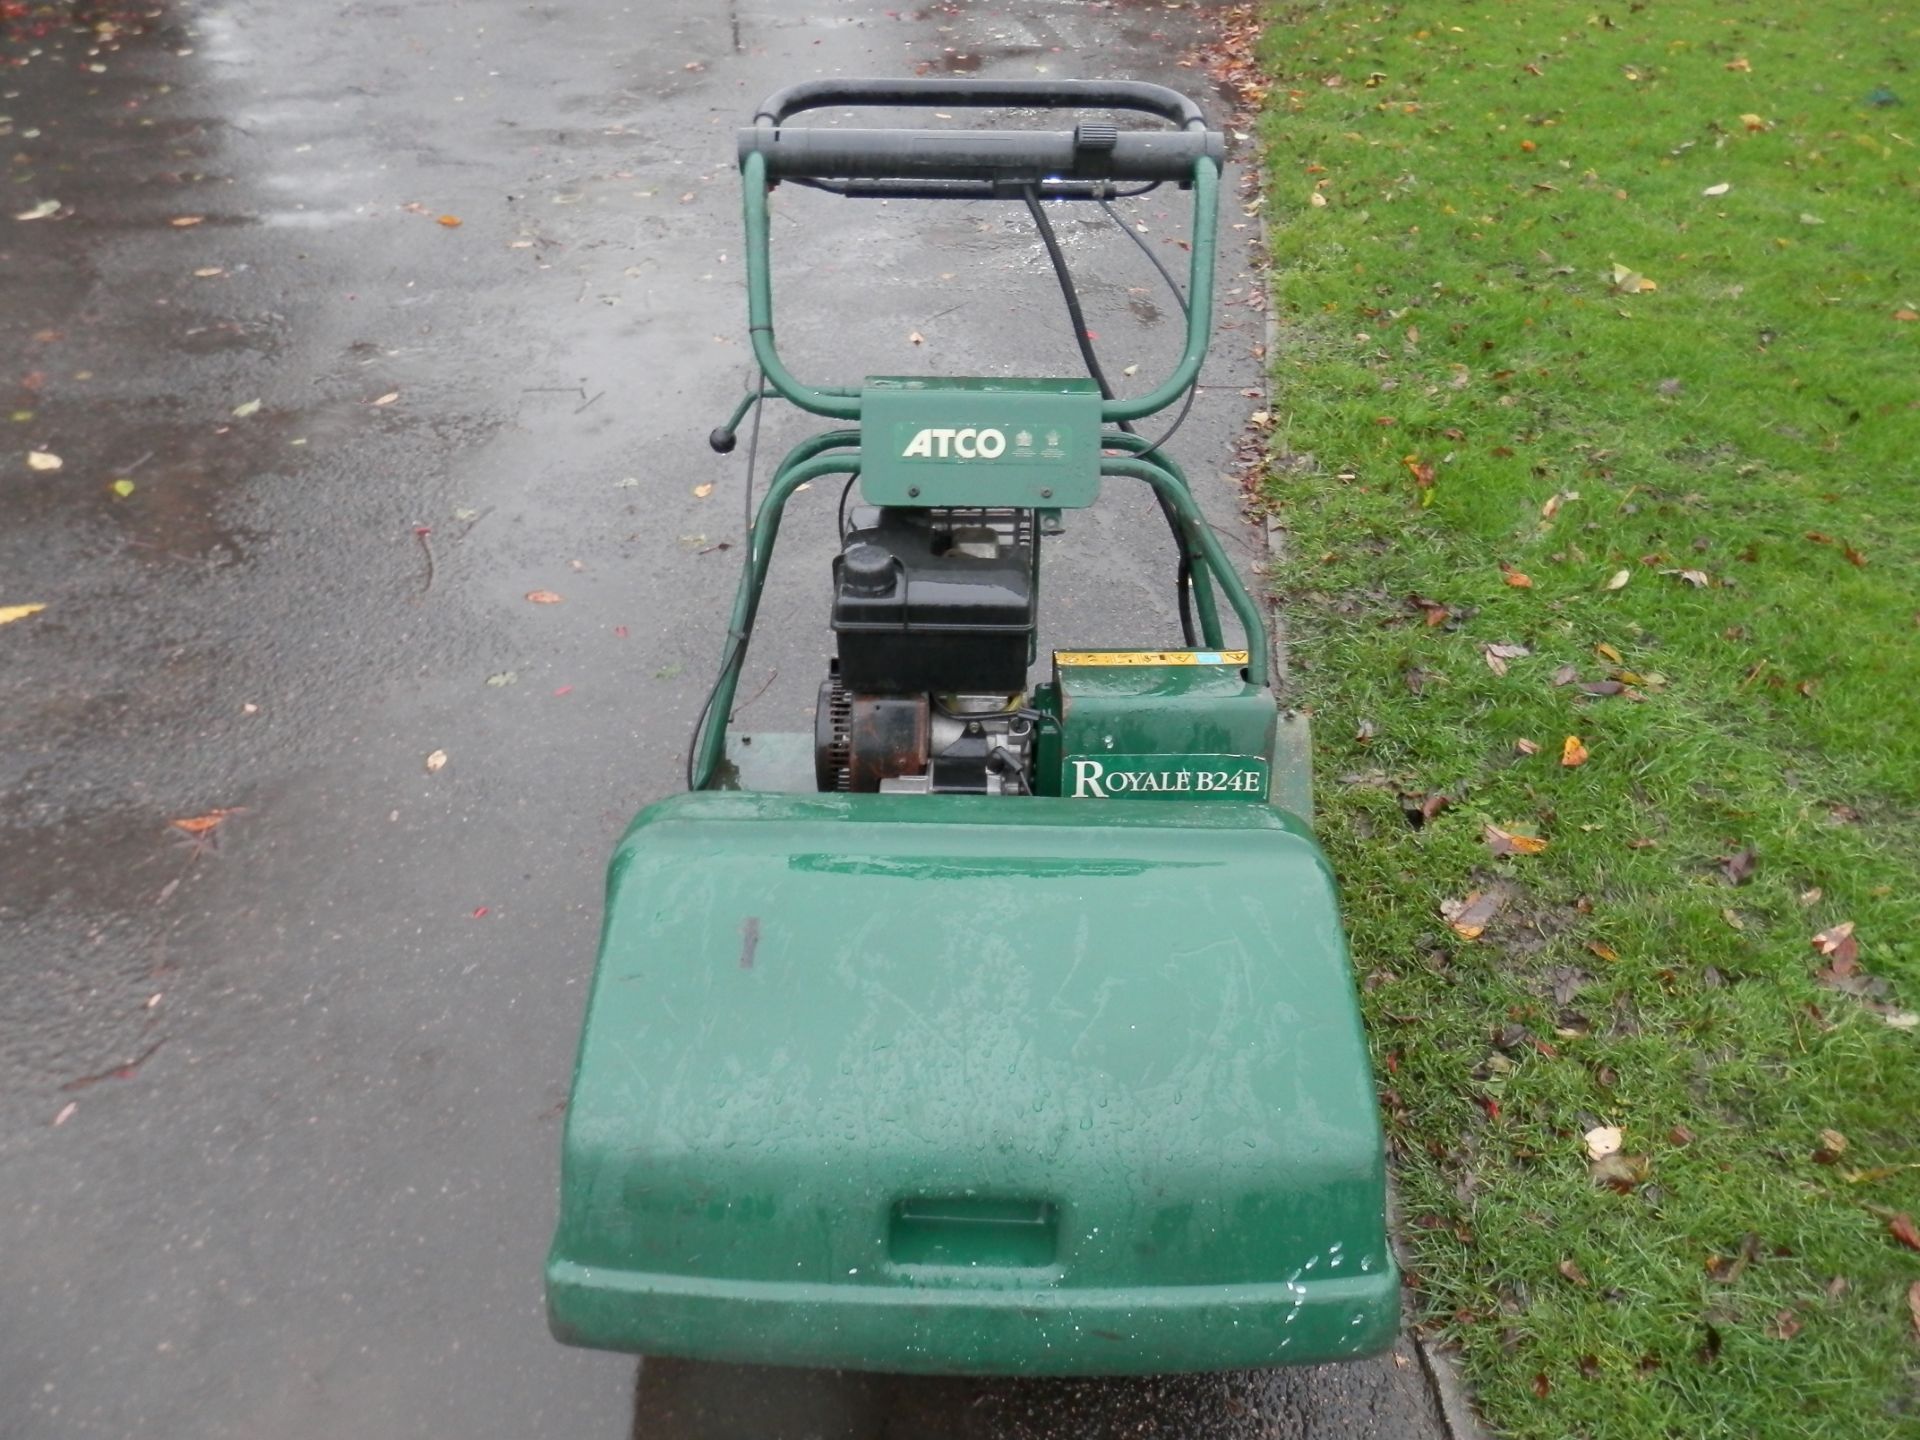 ATCO ROYALE B24E SELF PROPELLED PETROL MOWER. GOOD WORKING ORDER. - Image 2 of 8